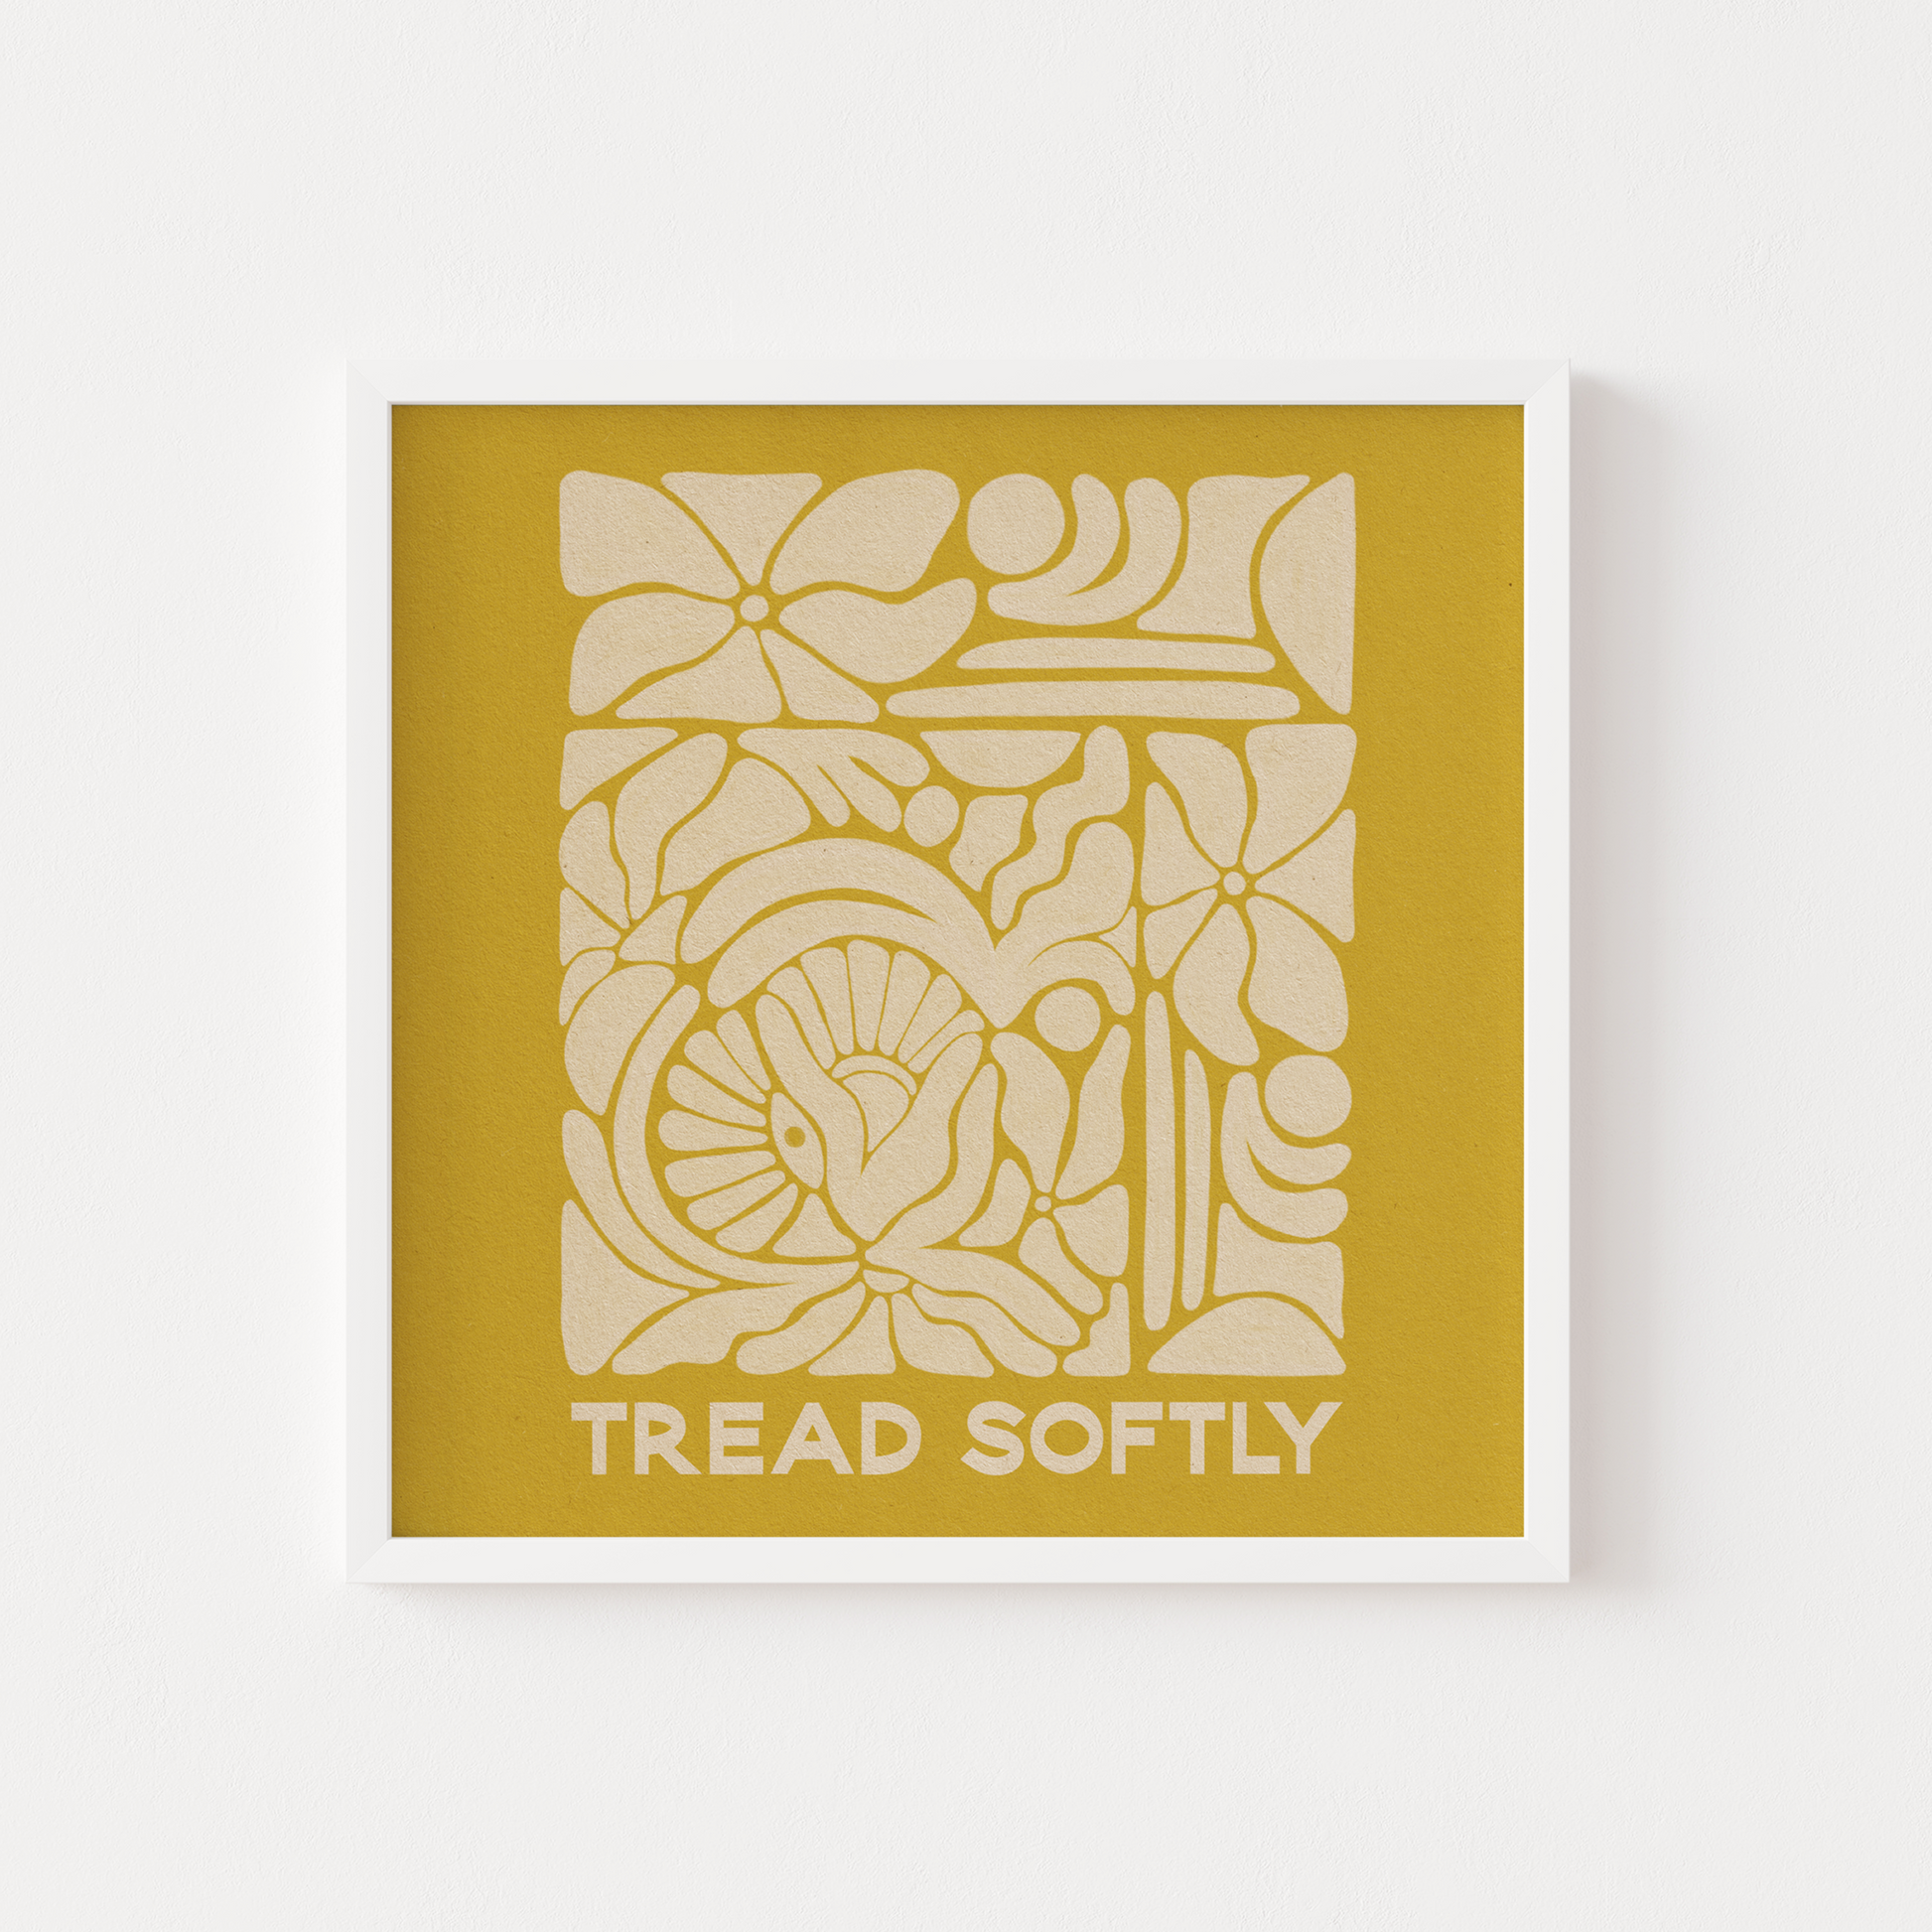 Image reads "Tread Softly" with abstract shapes & florals surrounding above.